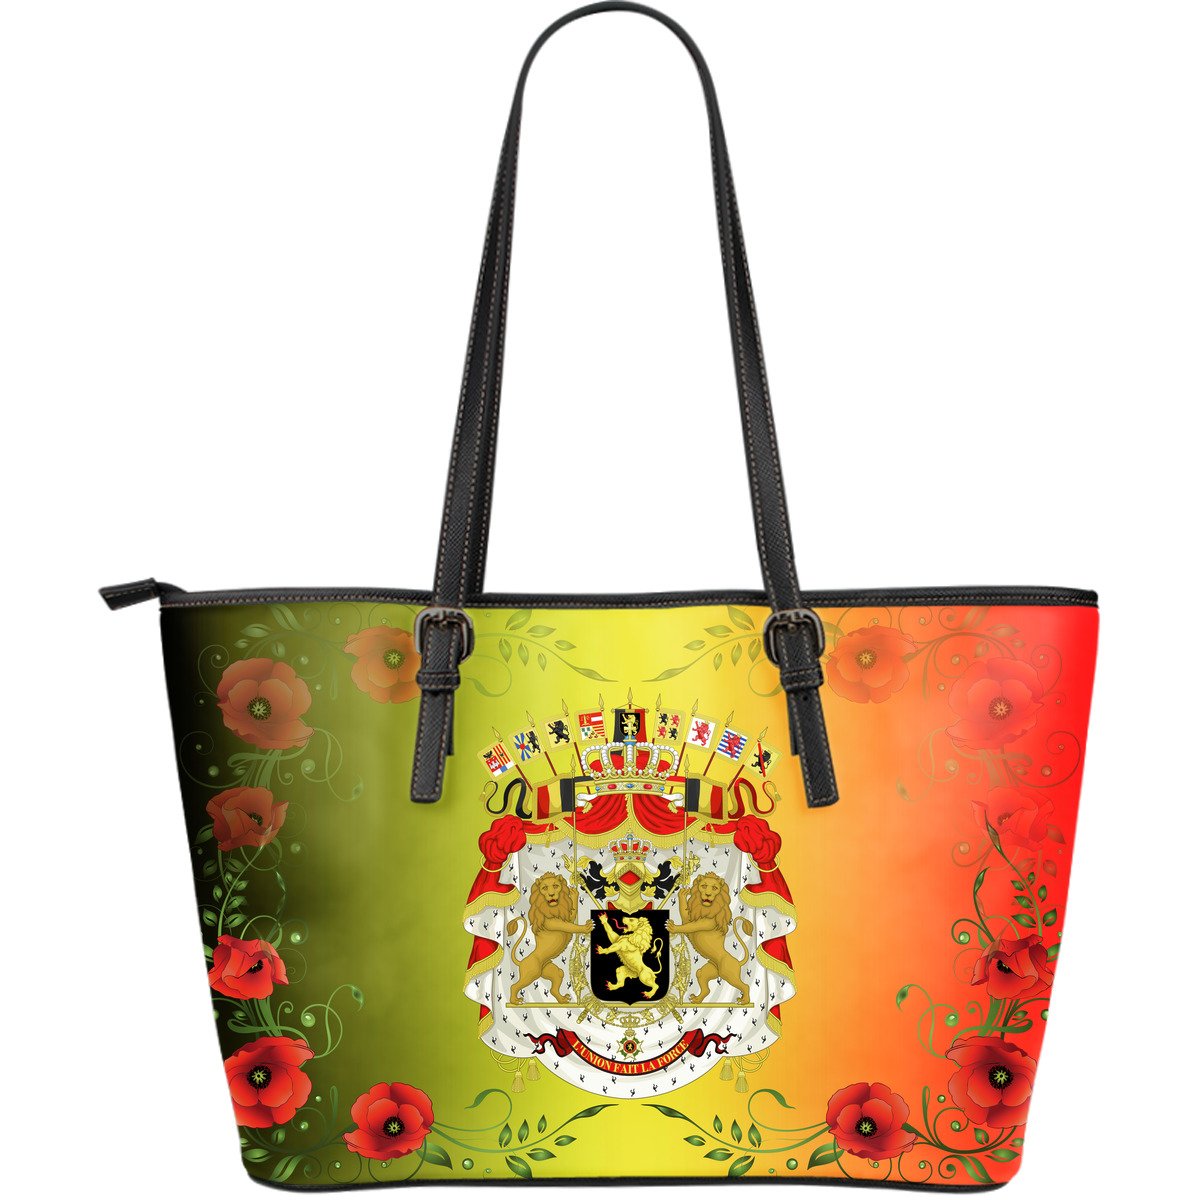 belgium-coat-of-arms-in-red-poppies-large-leather-tote-bag